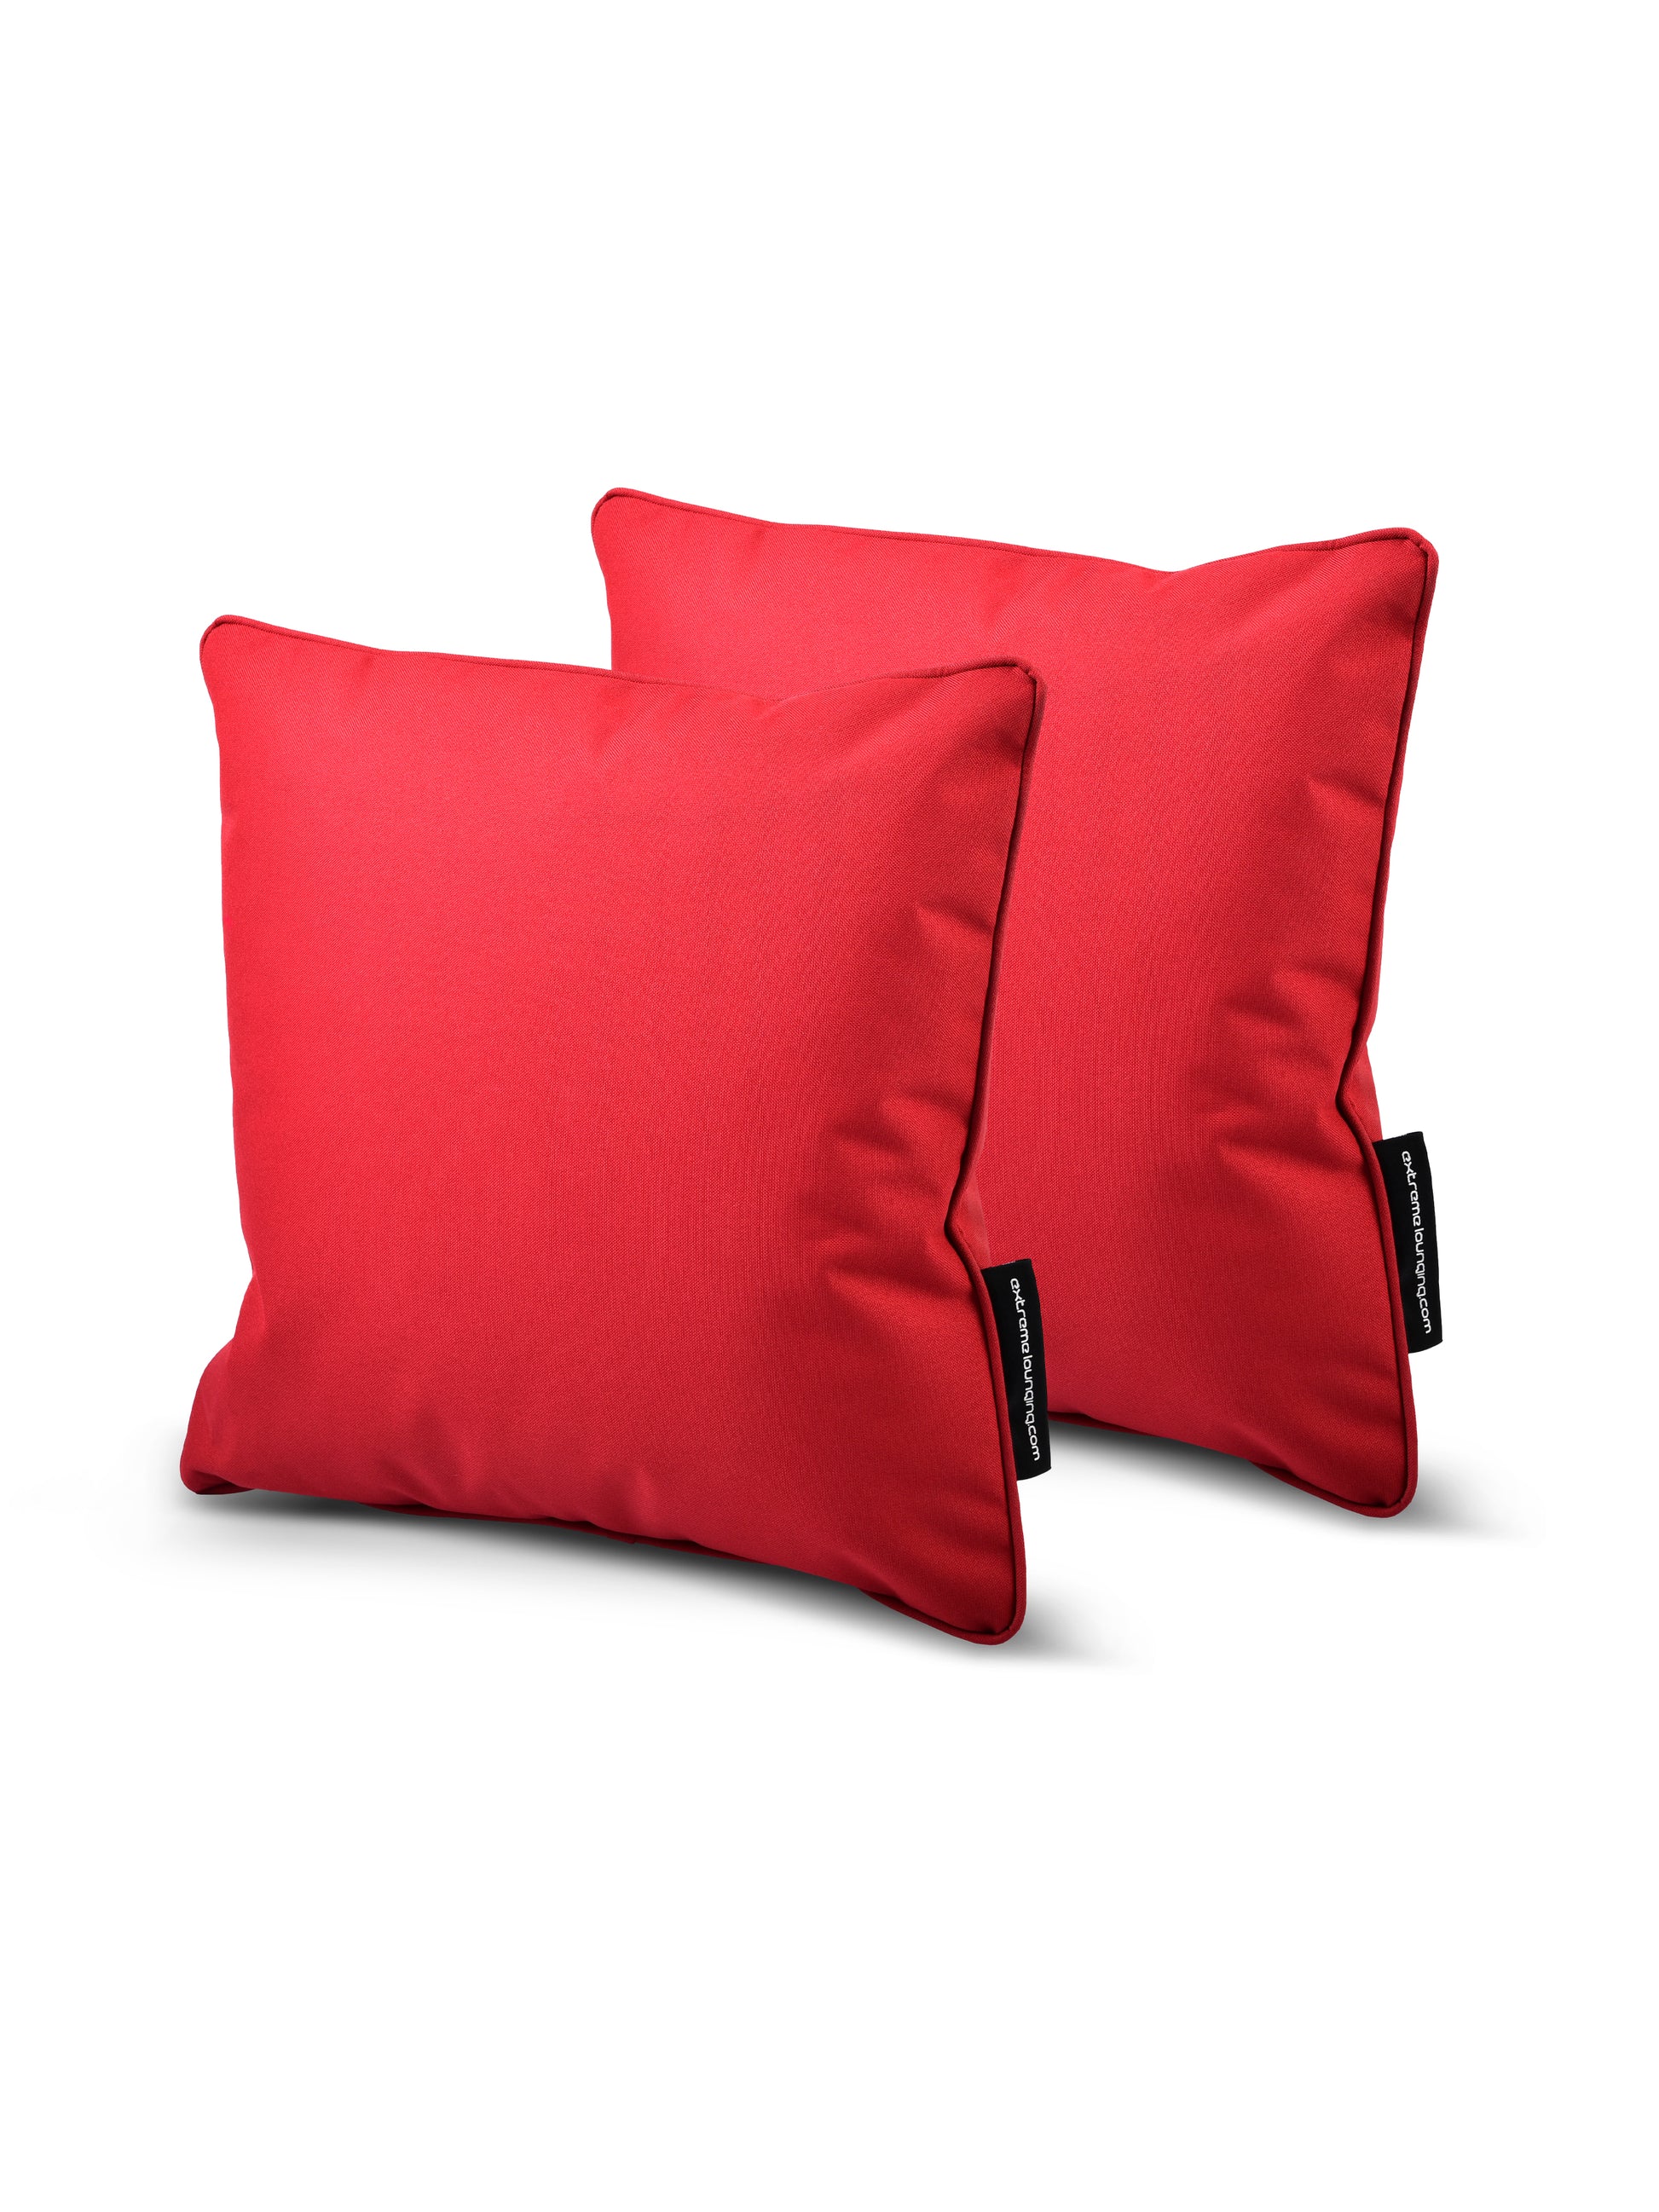 A pair of red, splash-proof cushions crafted from breathable polyester, Brisks B Cushion Twin Pack Brights Collection.